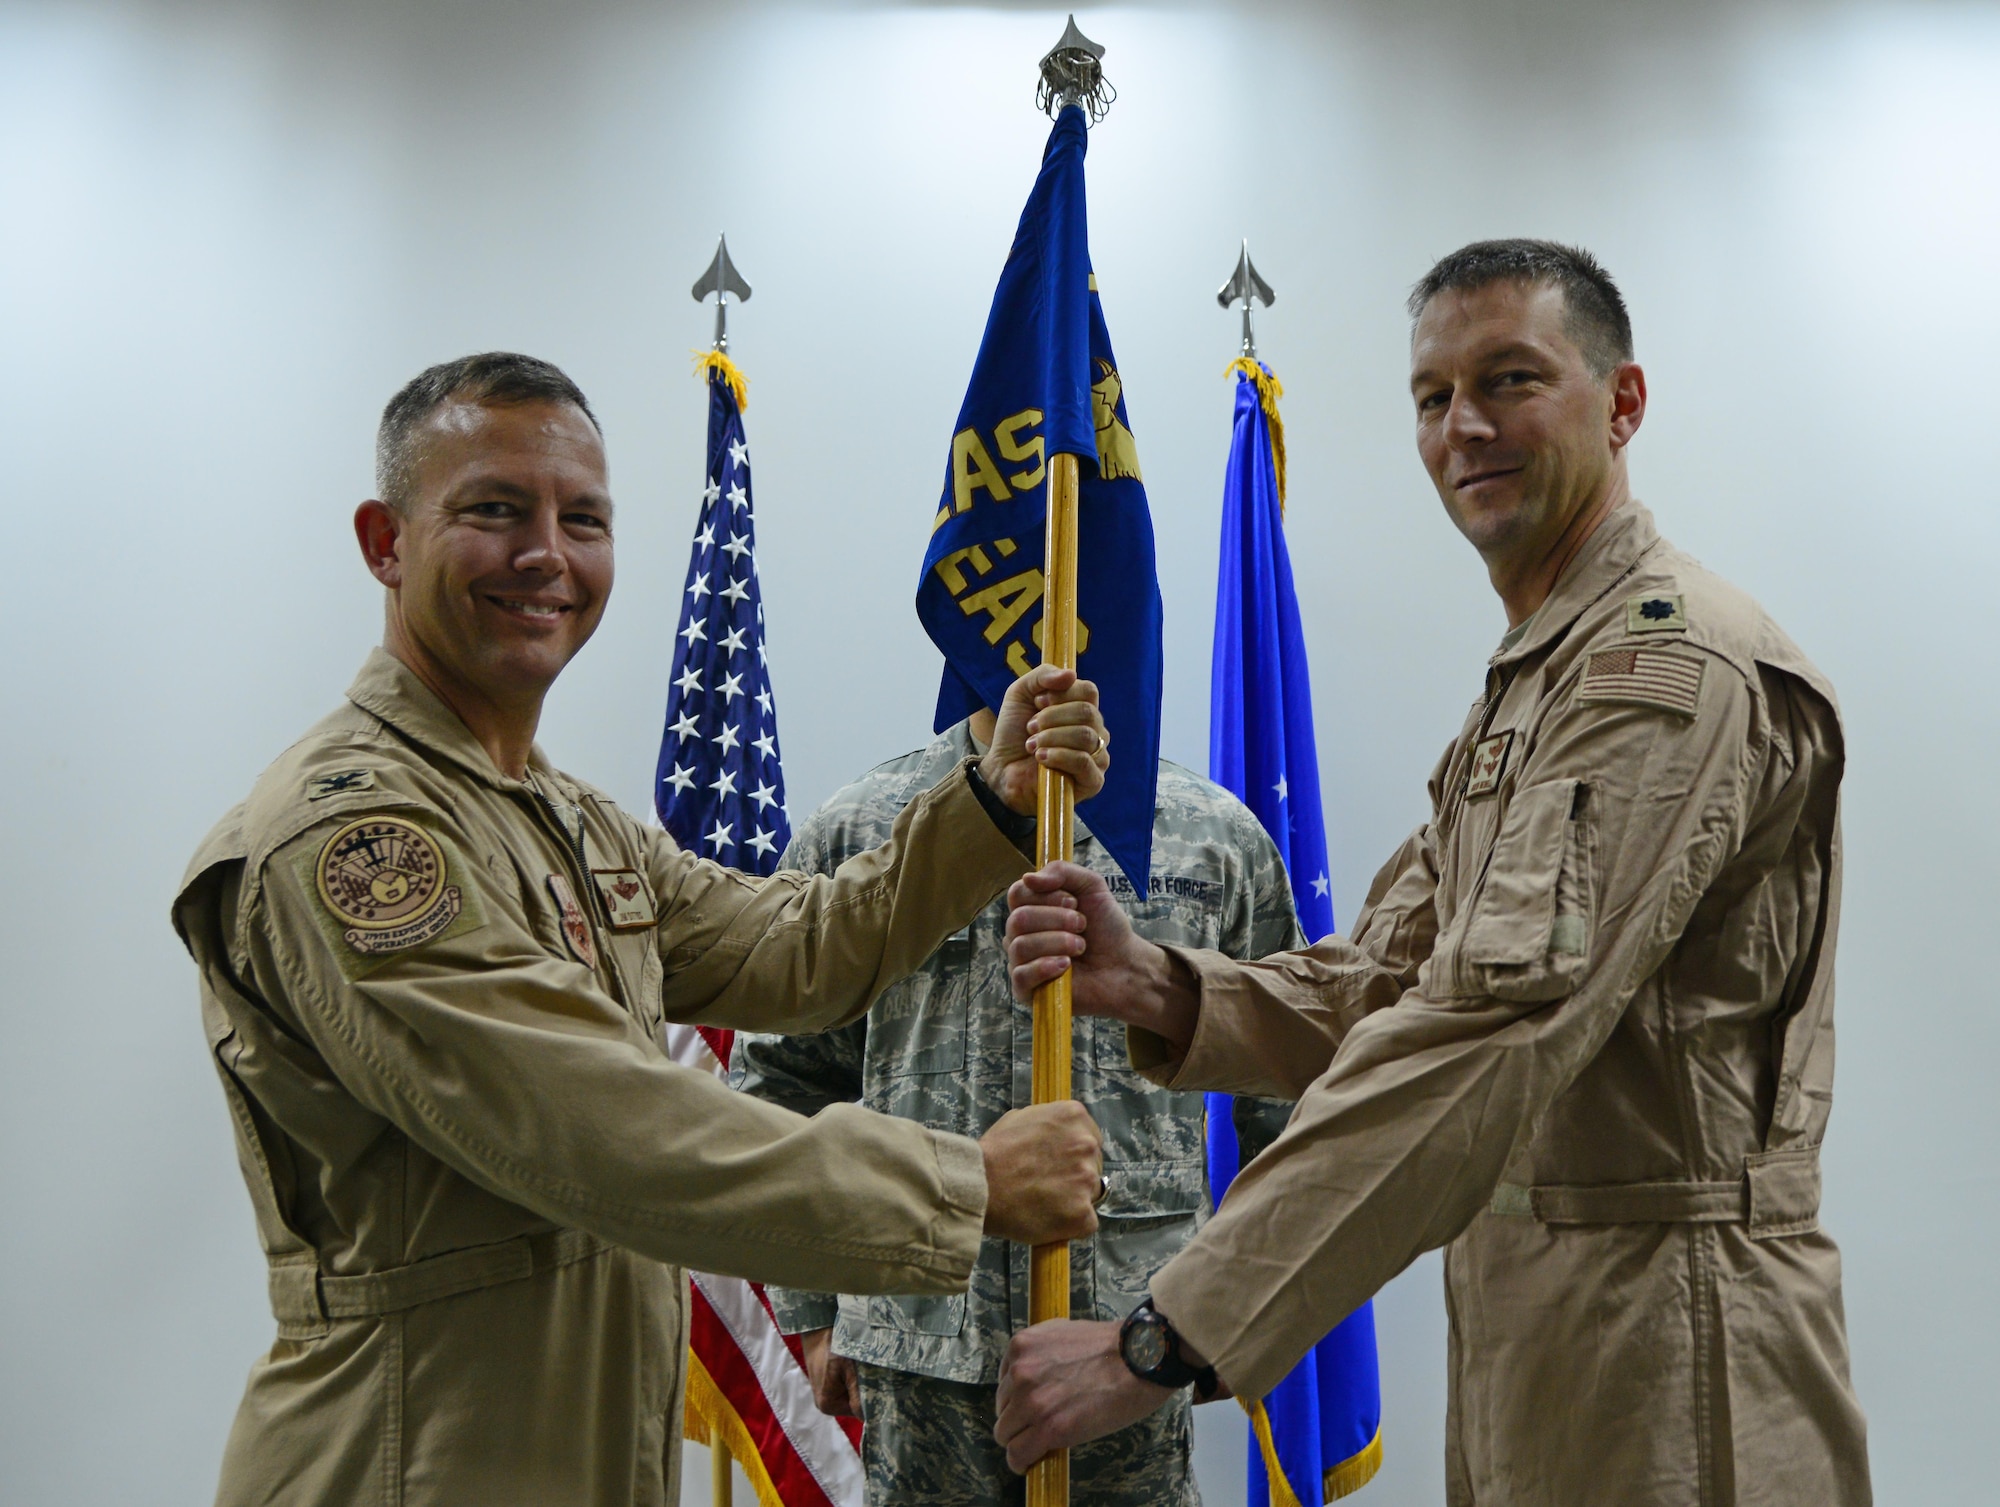 U.S. Air Force Col. Jim Dittus, left, 379th Expeditionary Operations Group commander, passes the 746th Expeditionary Airlift squadron guidon to Lt. Col. Byron Newell during a change of command ceremony, March 1, 2015 at Al Udeid Air Base, Qatar. Newell assumed command of the 746th EAS from Lt. Col. Jeremy Schaad. (U.S. Air Force photo by Senior Airman Kia Atkins)